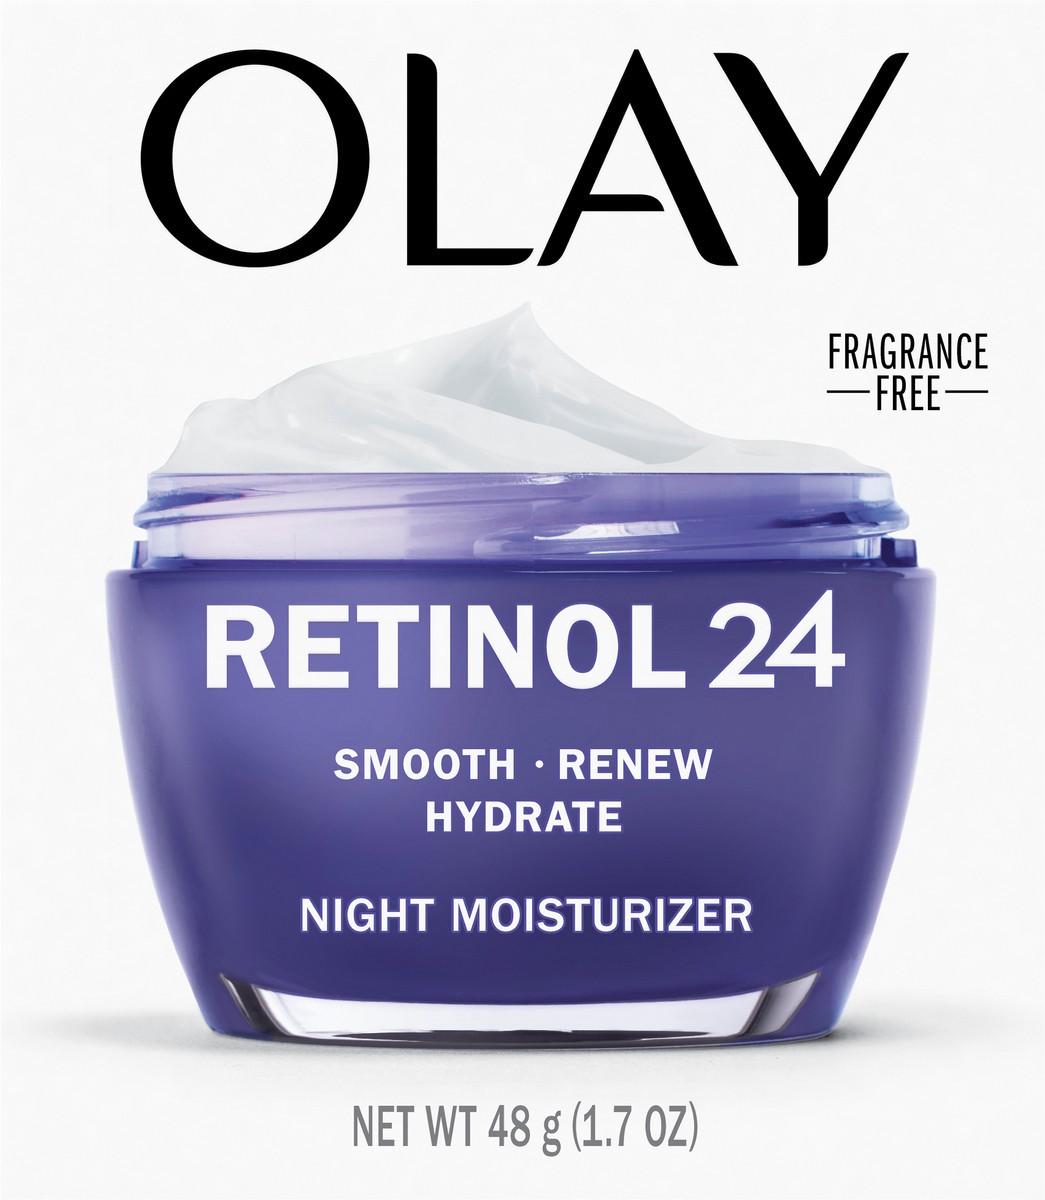 slide 2 of 2, Olay Retinol 24 Face Moisturizer, 1.7 oz Anti-Aging Night Face Cream for Wrinkles and Uneven Skin Tone with Retinol, 1.7 oz